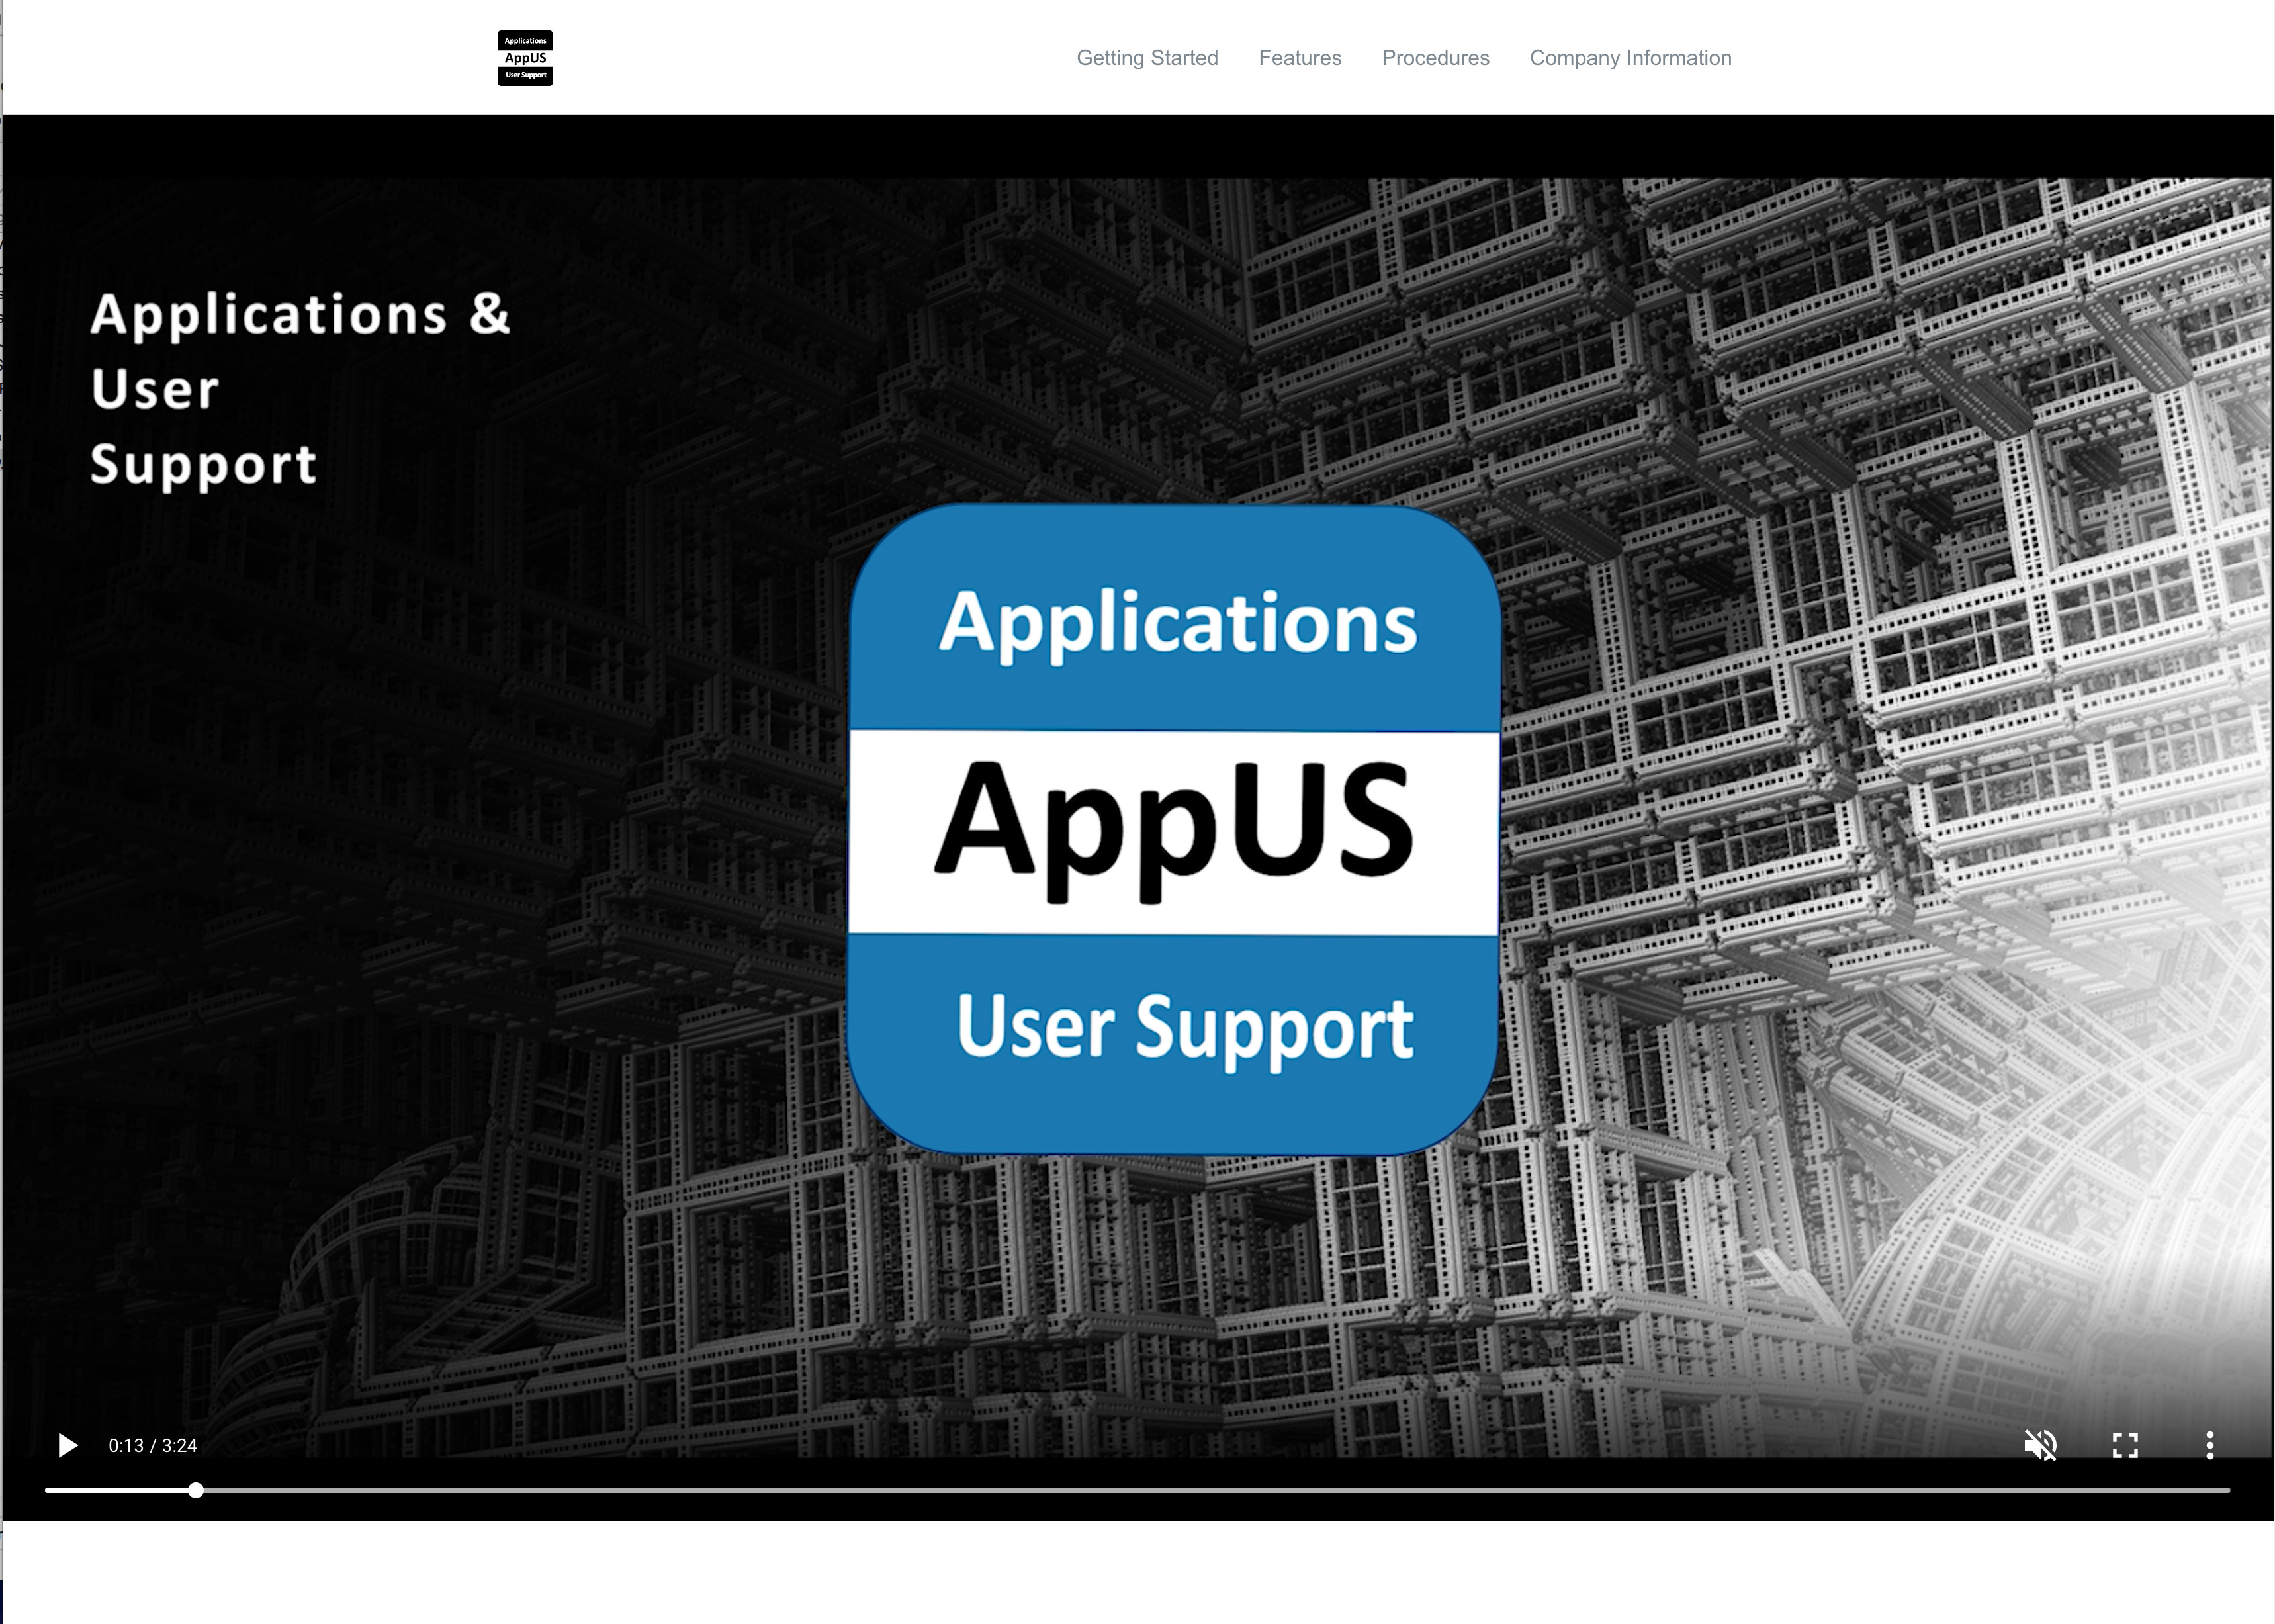 Earlier design iterations of AppUS' HTML 5 based help system